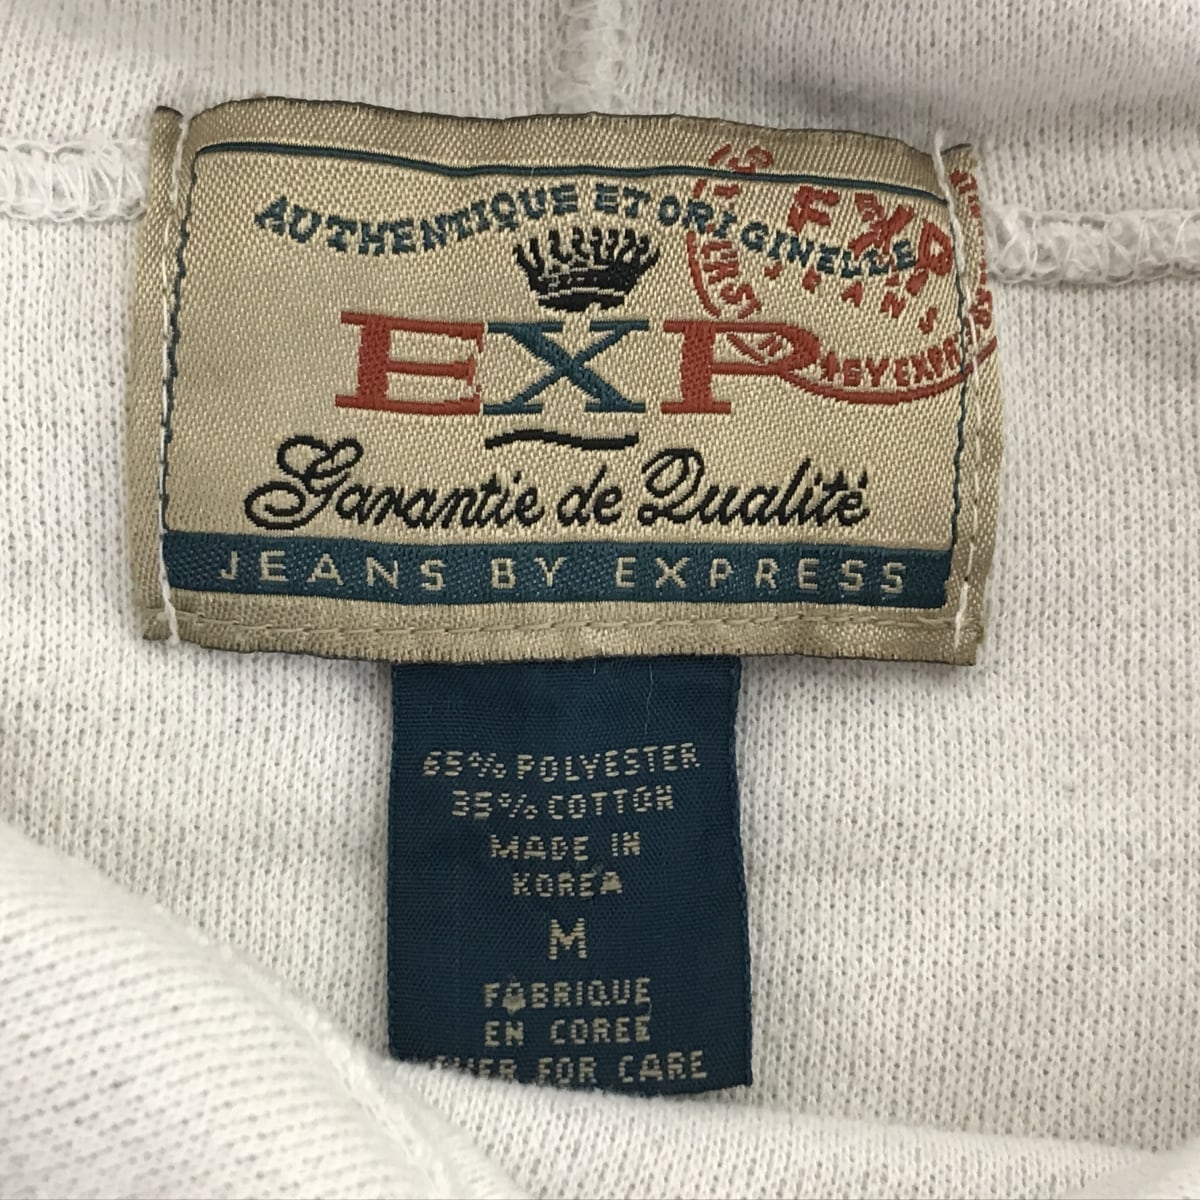 EXP JEANS BY EXPERSS 90〜 00年代 プリント と 豪華 刺繍入り 起毛